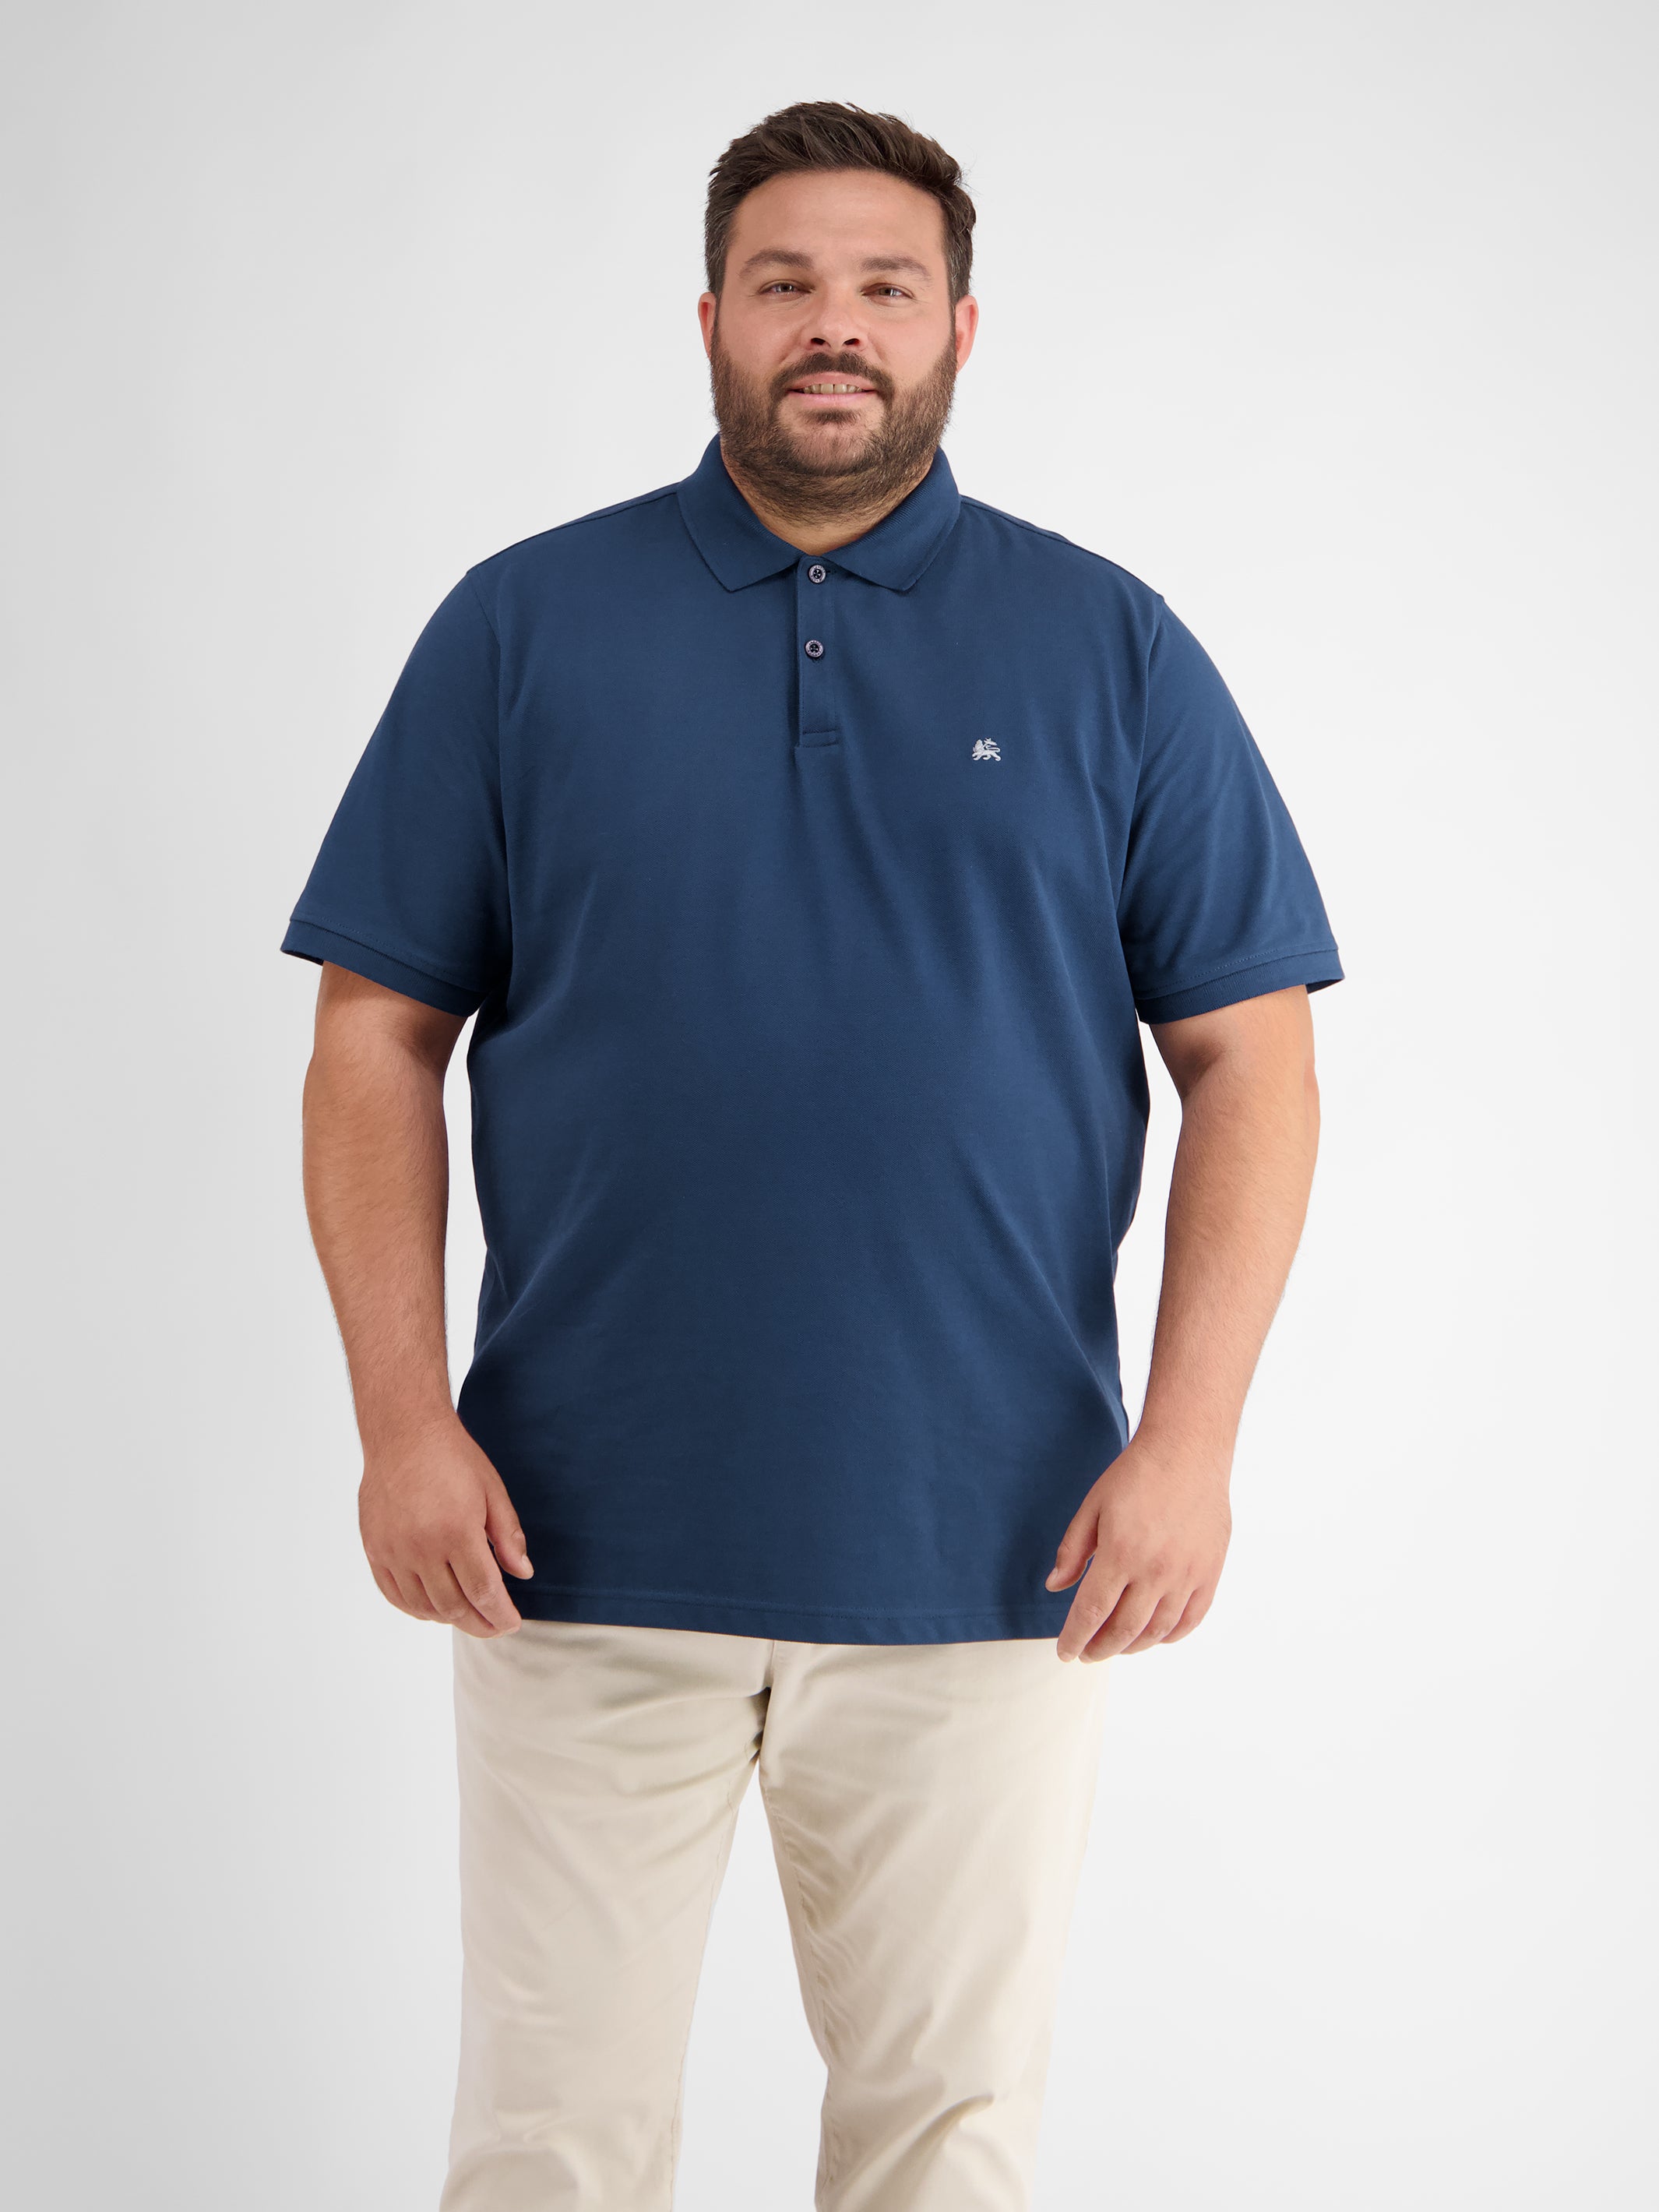 in LERROS Polo colors SHOP shirt – many